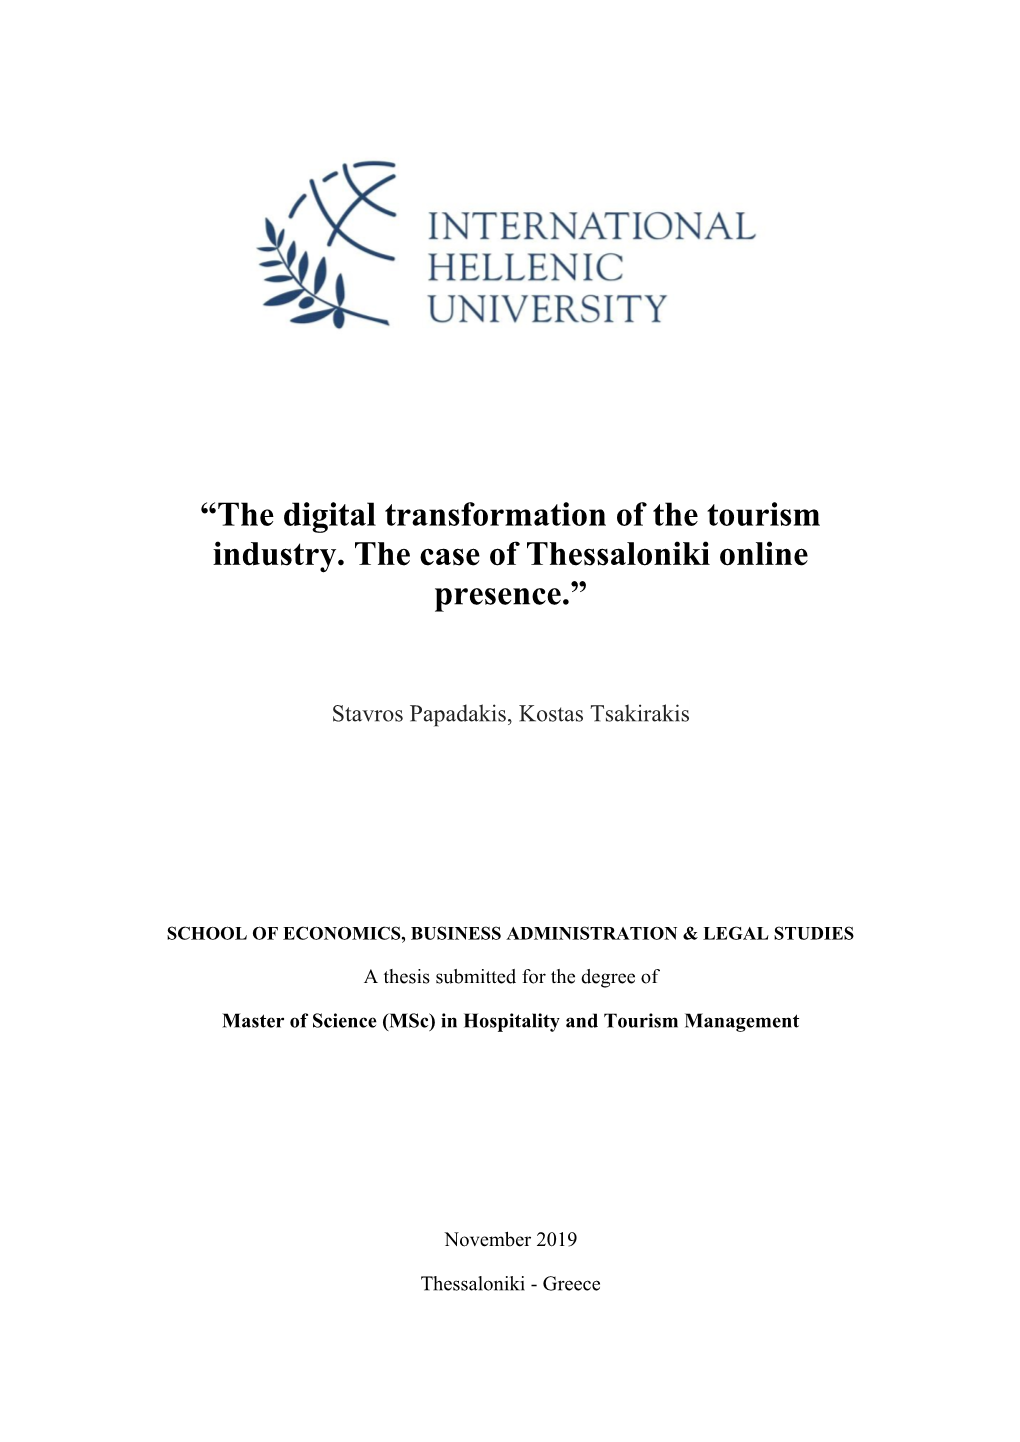 “The Digital Transformation of the Tourism Industry. the Case of Thessaloniki Online Presence.”